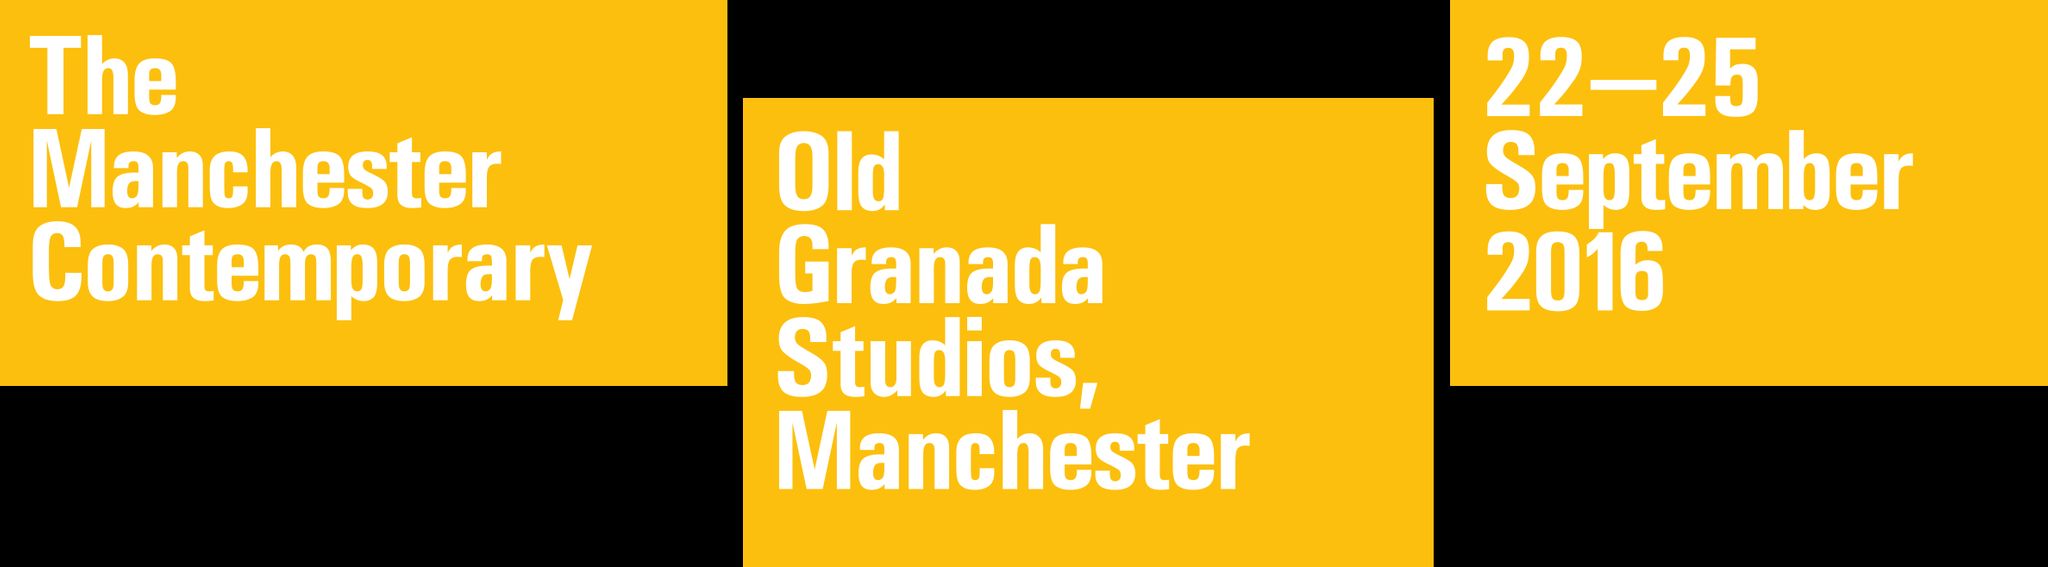 The Manchester Contemporary 2016